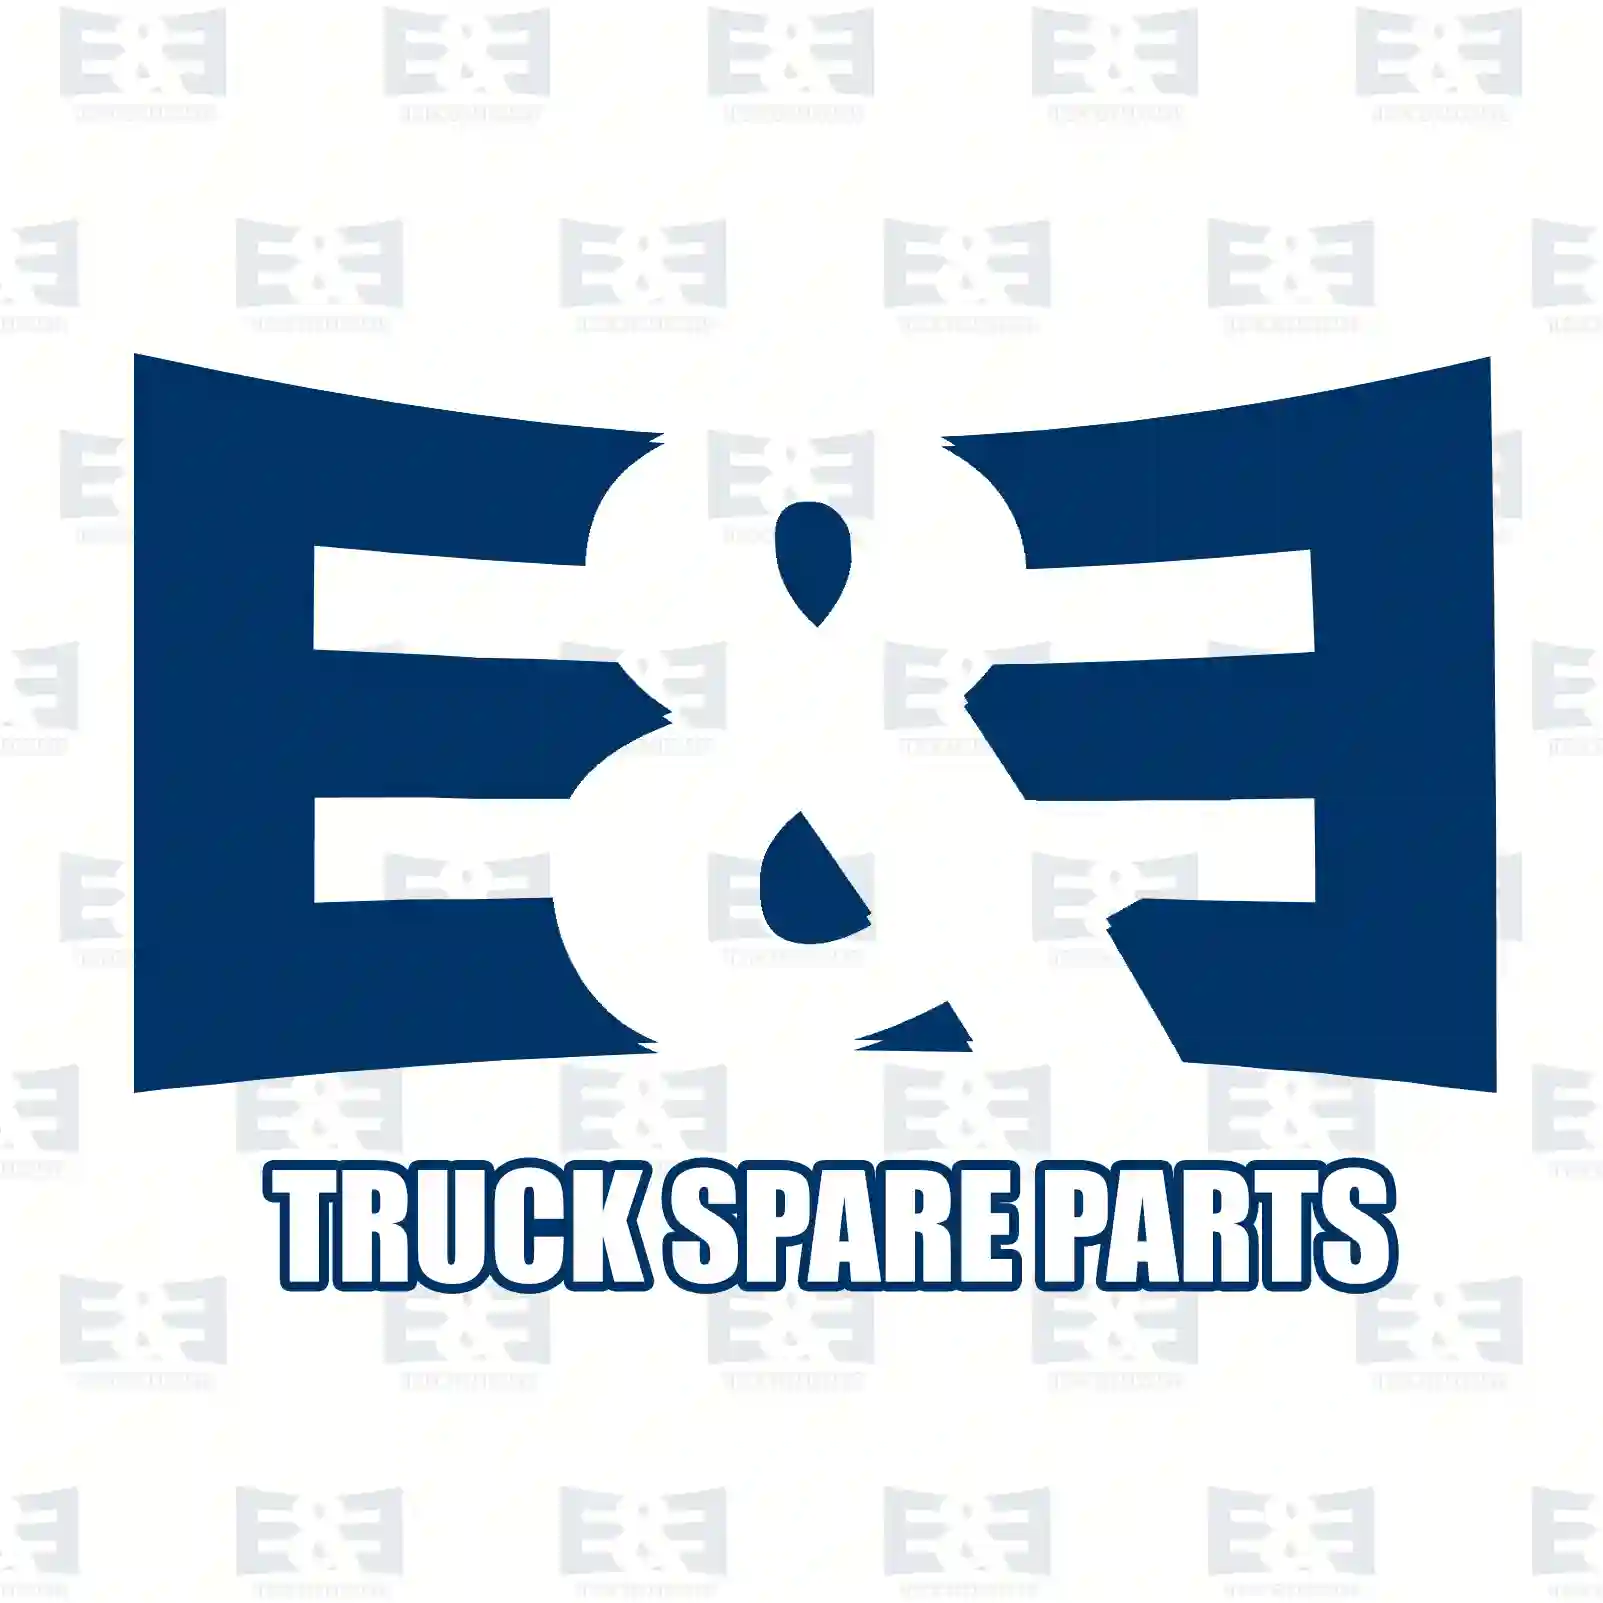 Bearing joint, clutch cylinder, 2E2288724, 0009961045, 0009961145, ||  2E2288724 E&E Truck Spare Parts | Truck Spare Parts, Auotomotive Spare Parts Bearing joint, clutch cylinder, 2E2288724, 0009961045, 0009961145, ||  2E2288724 E&E Truck Spare Parts | Truck Spare Parts, Auotomotive Spare Parts